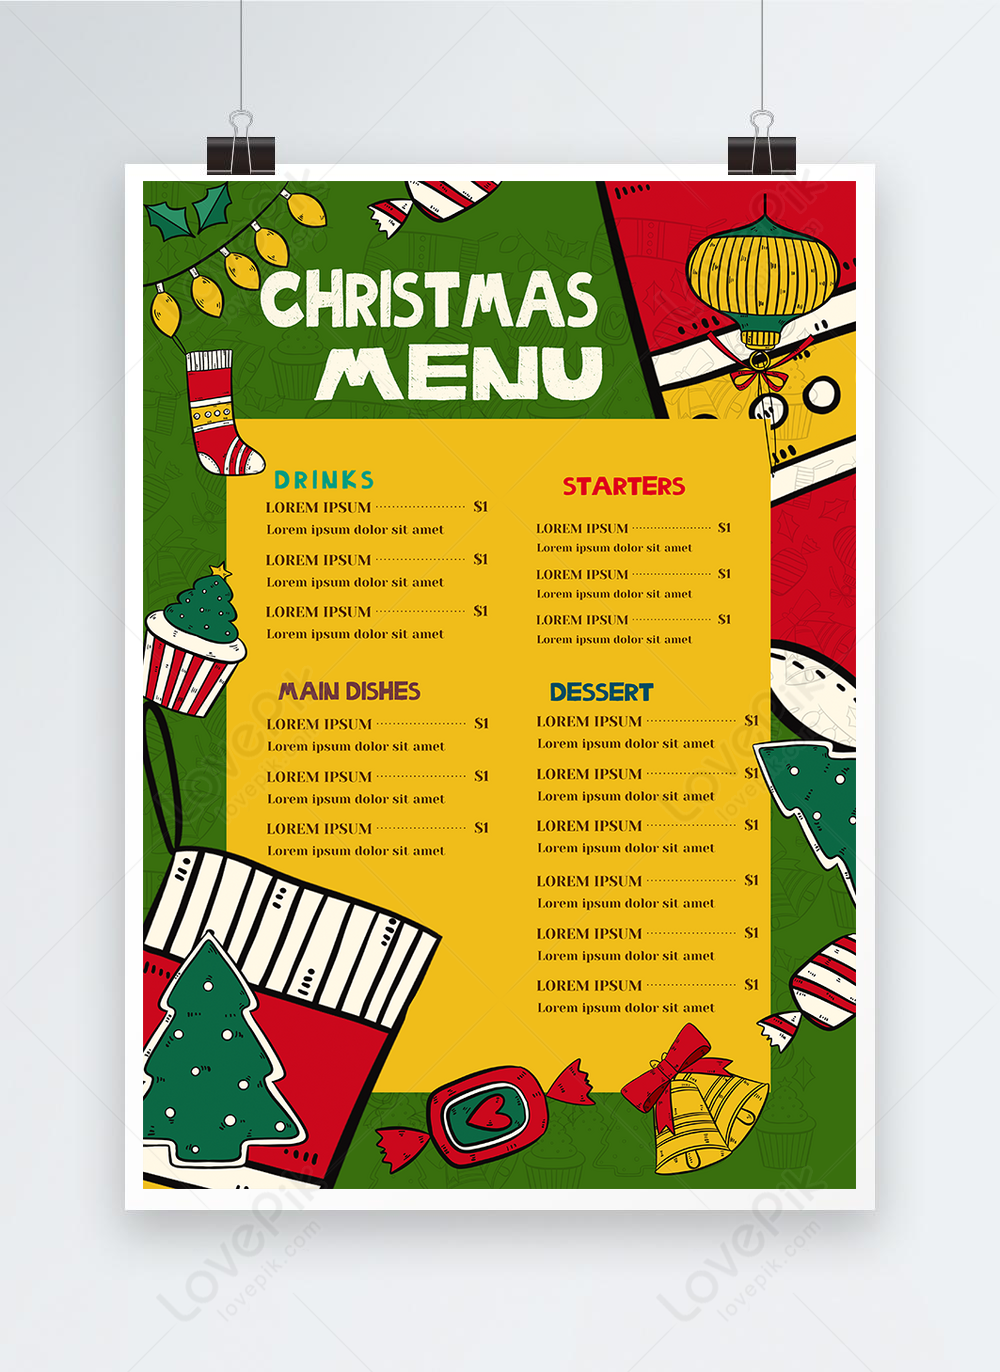 children-hand-drawn-christmas-menu-template-image-picture-free-download